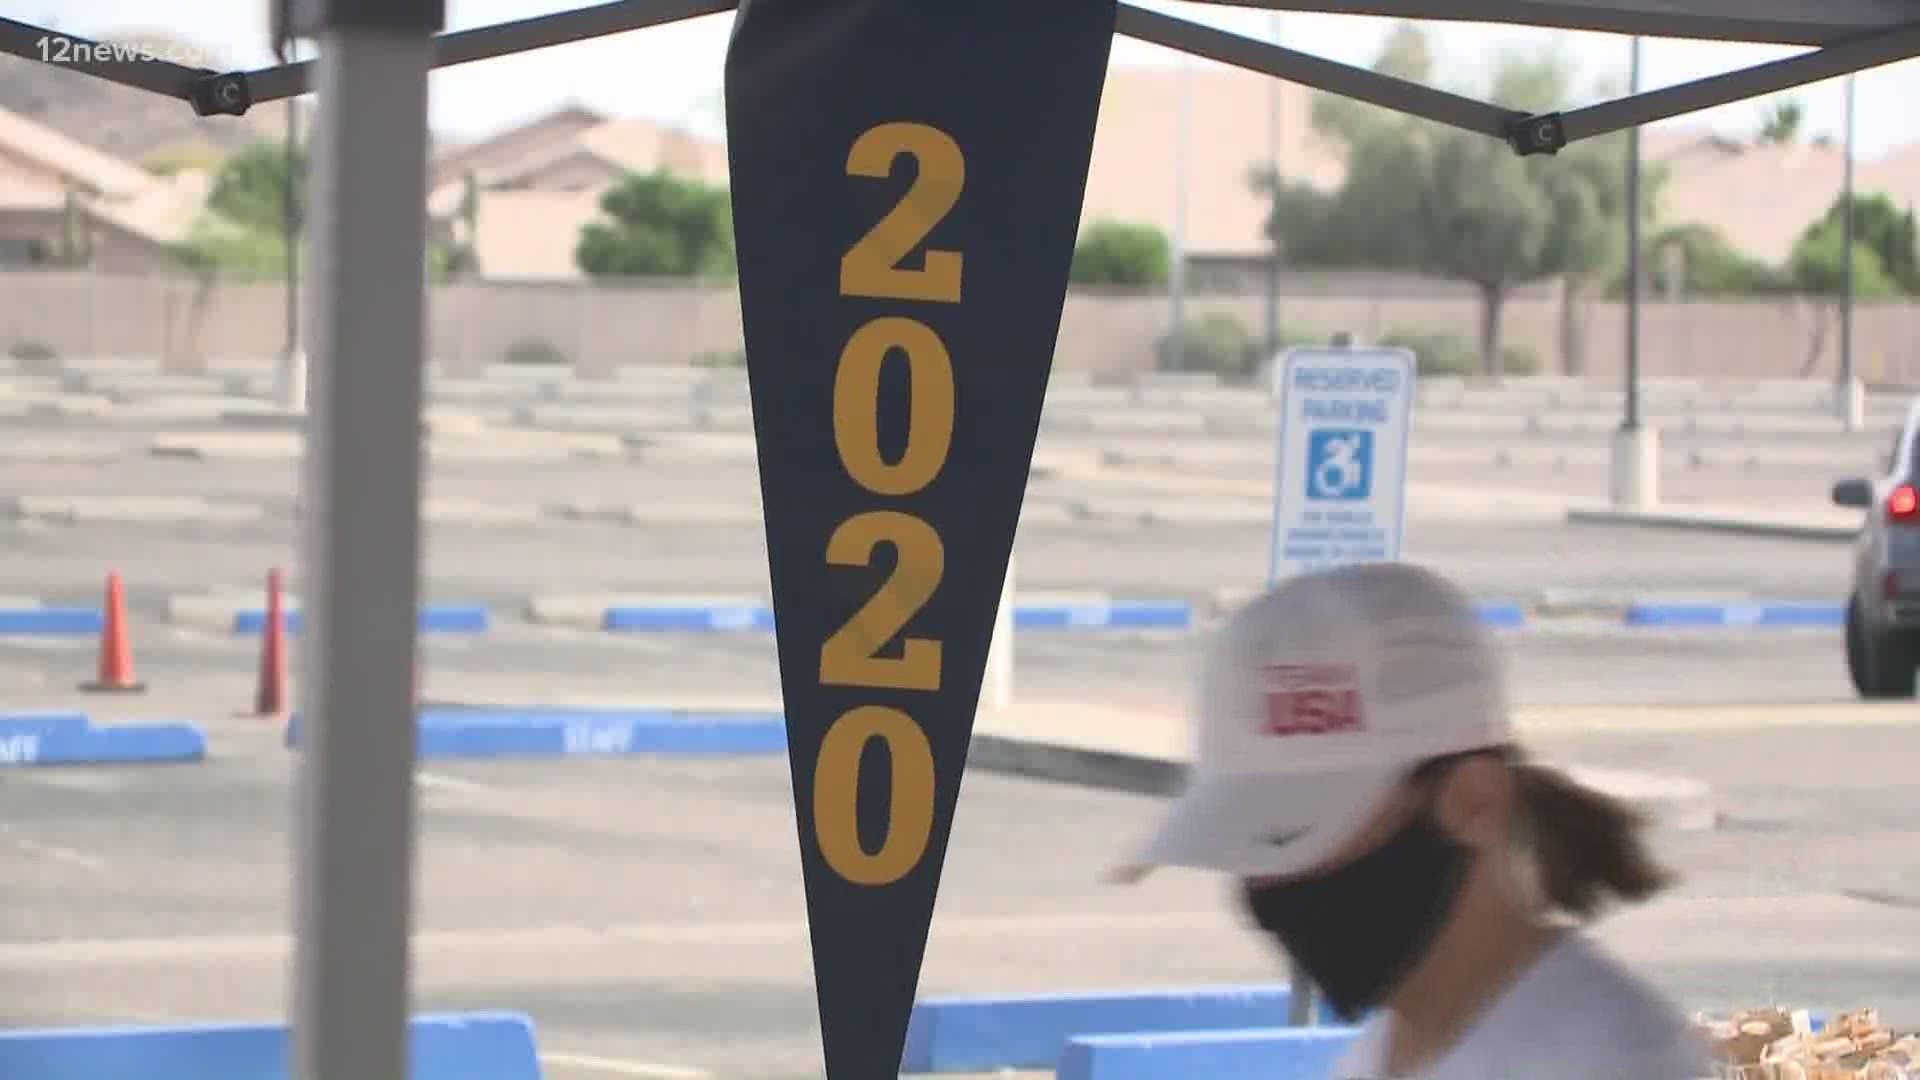 High school seniors won't be getting the traditional graduation ceremony this year, so Desert Vista HS figured out some unique ways to celebrate the Class of 2020.